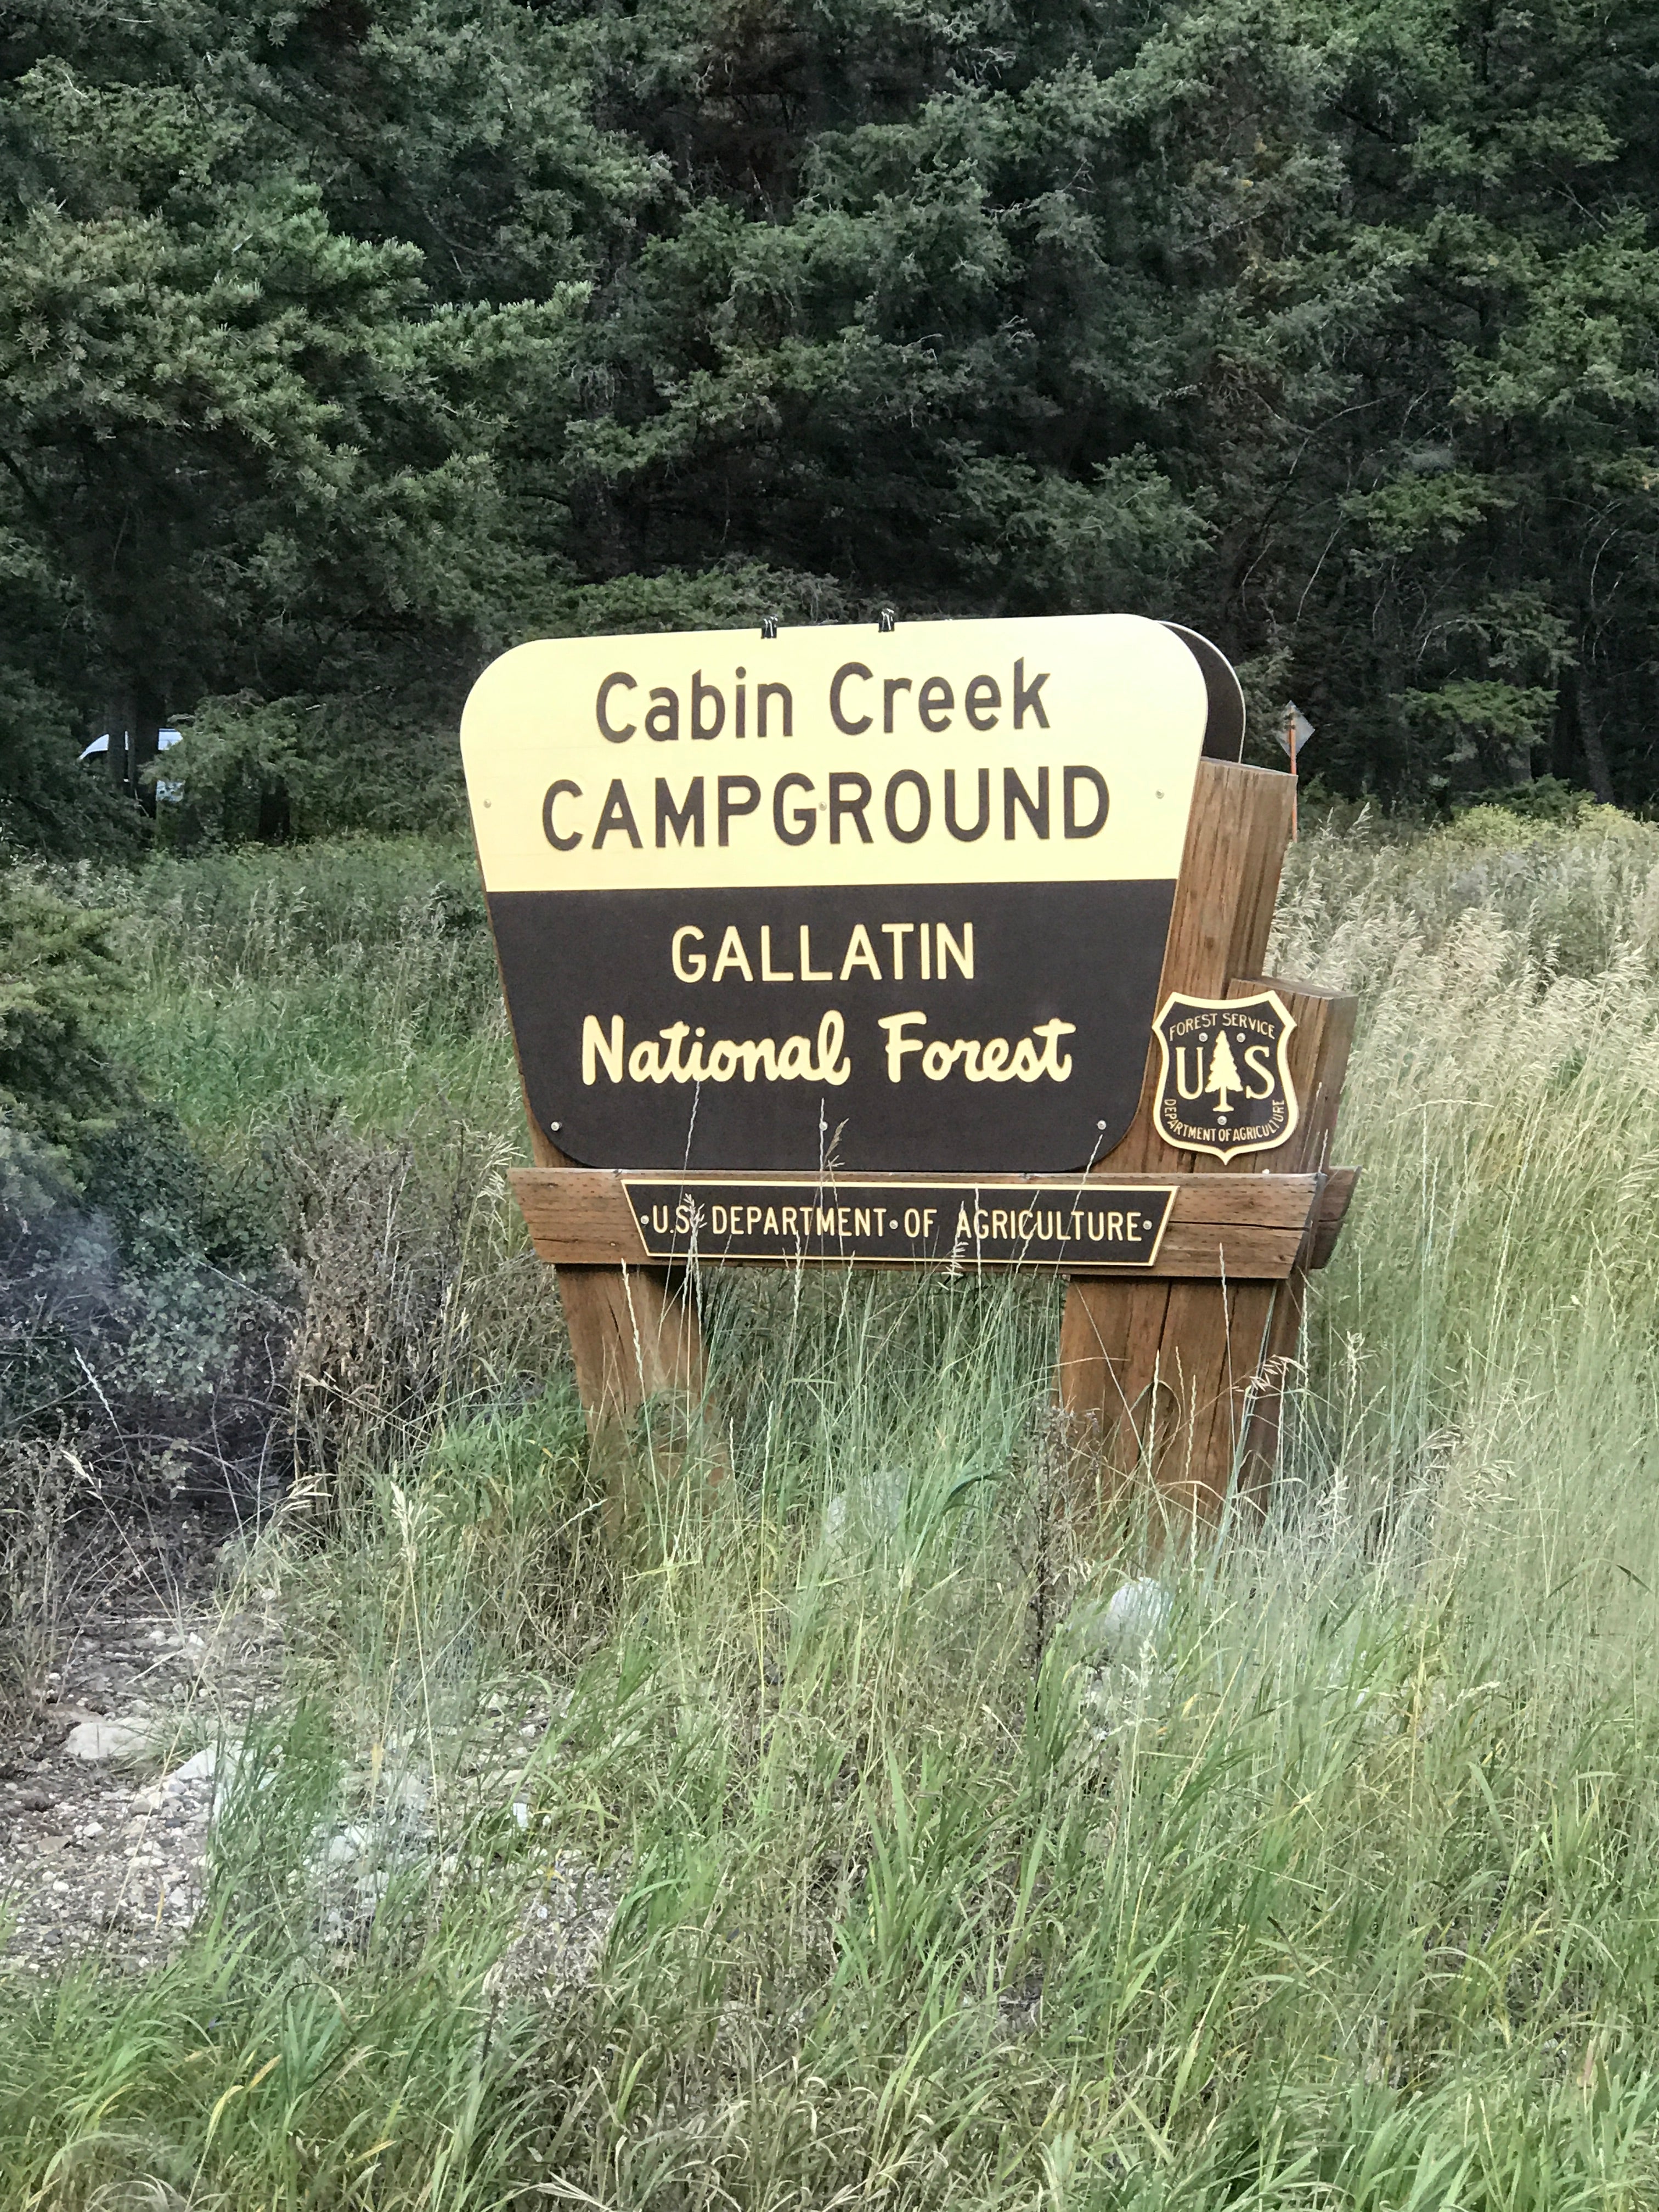 Camper submitted image from Cabin Creek Campground - 4